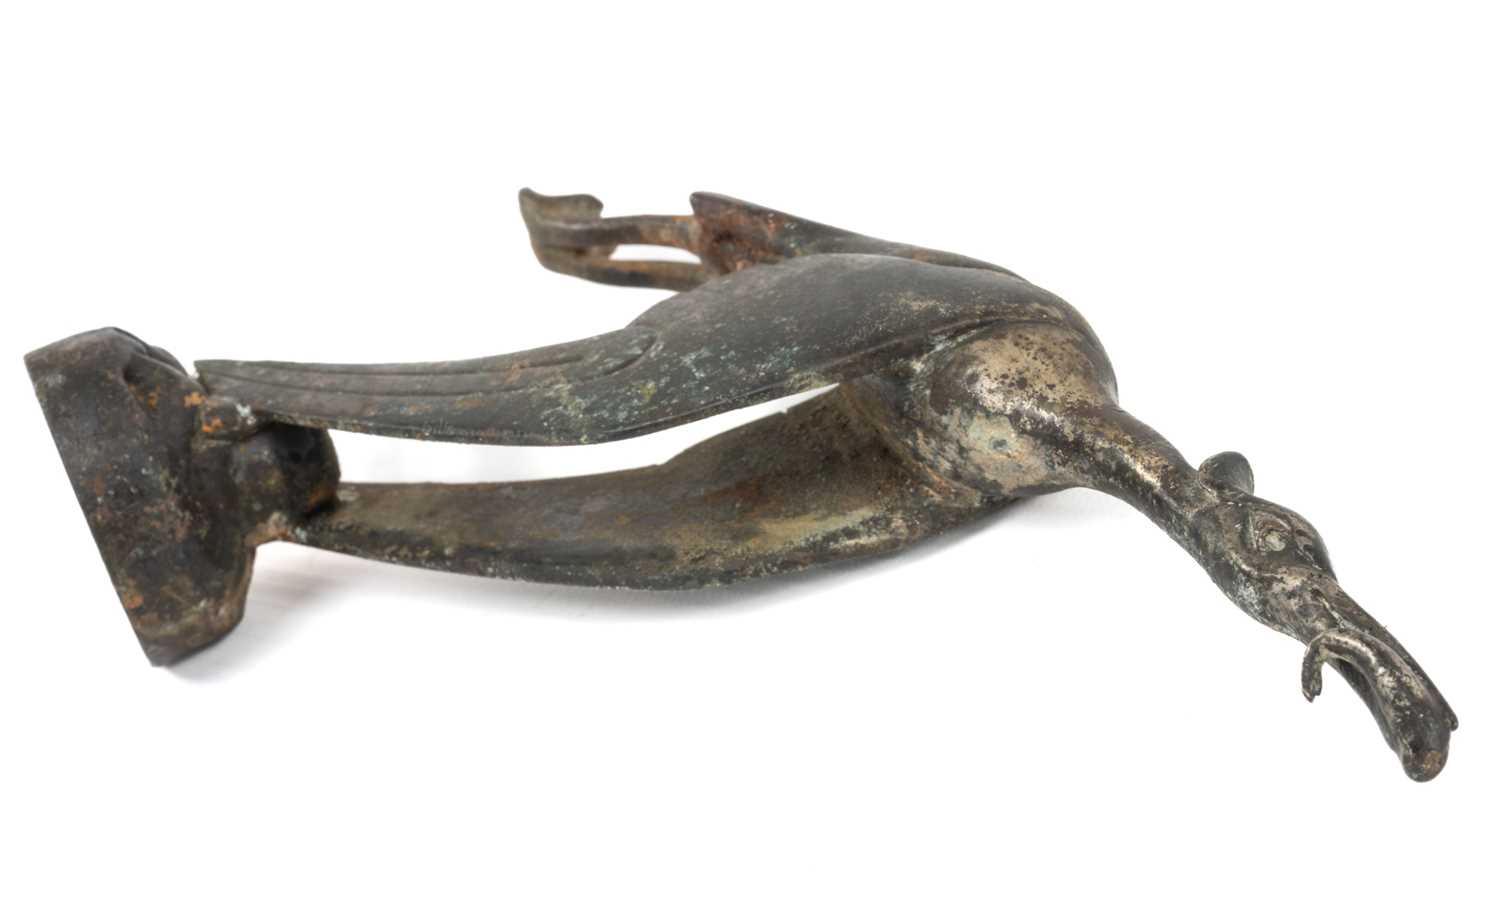 BRONZE HERON WITH FISH CAR MASCOT, by C H Paillet, produced by A E LeJeune, with 'AEL - Copyright' - Image 2 of 2